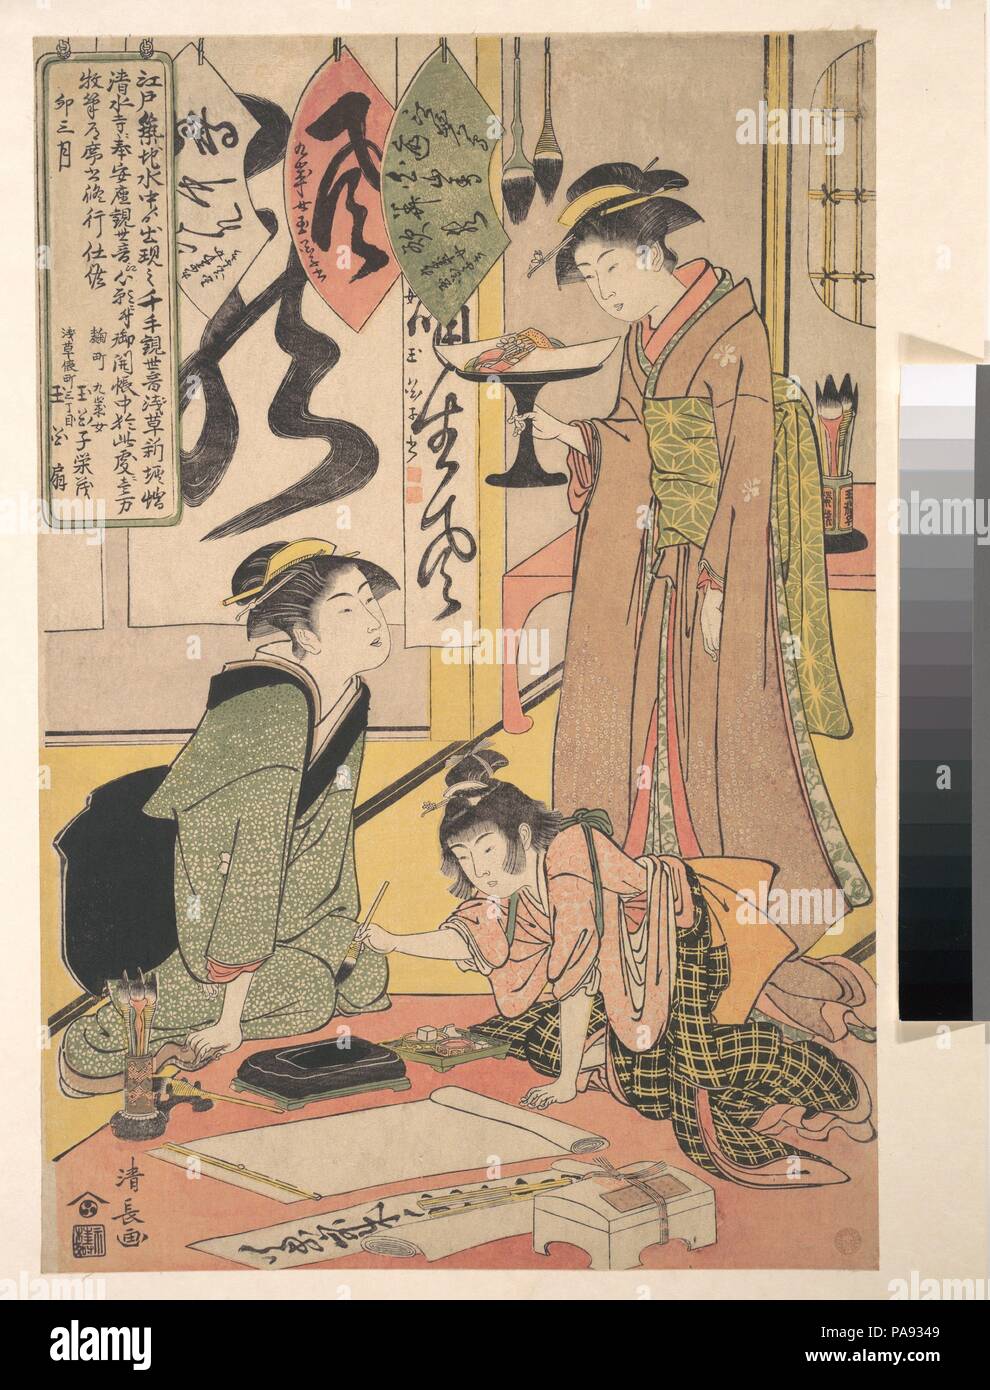 Japan Japanese Art & Culture collection of 10 old Illustrated